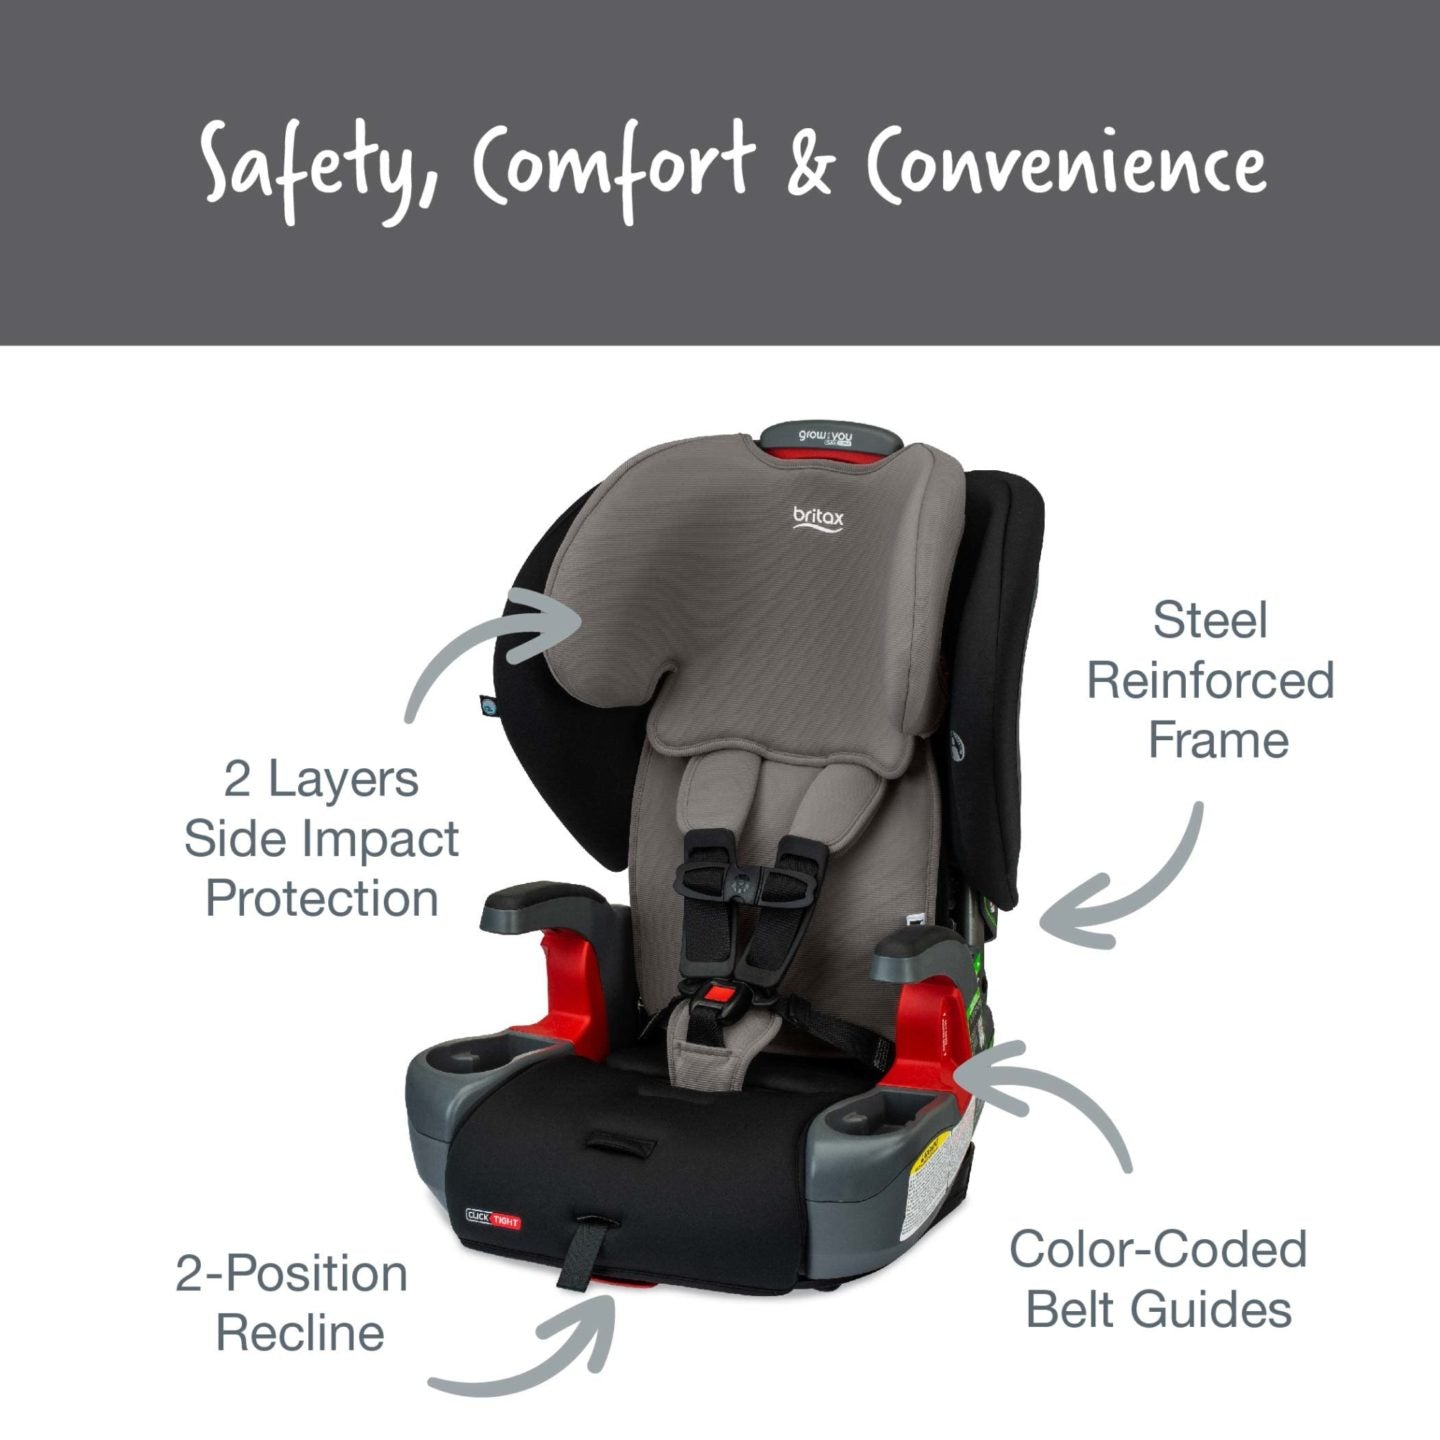 Britax - Grow with You ClickTight Harness Booster Car Seat, Grey Contour